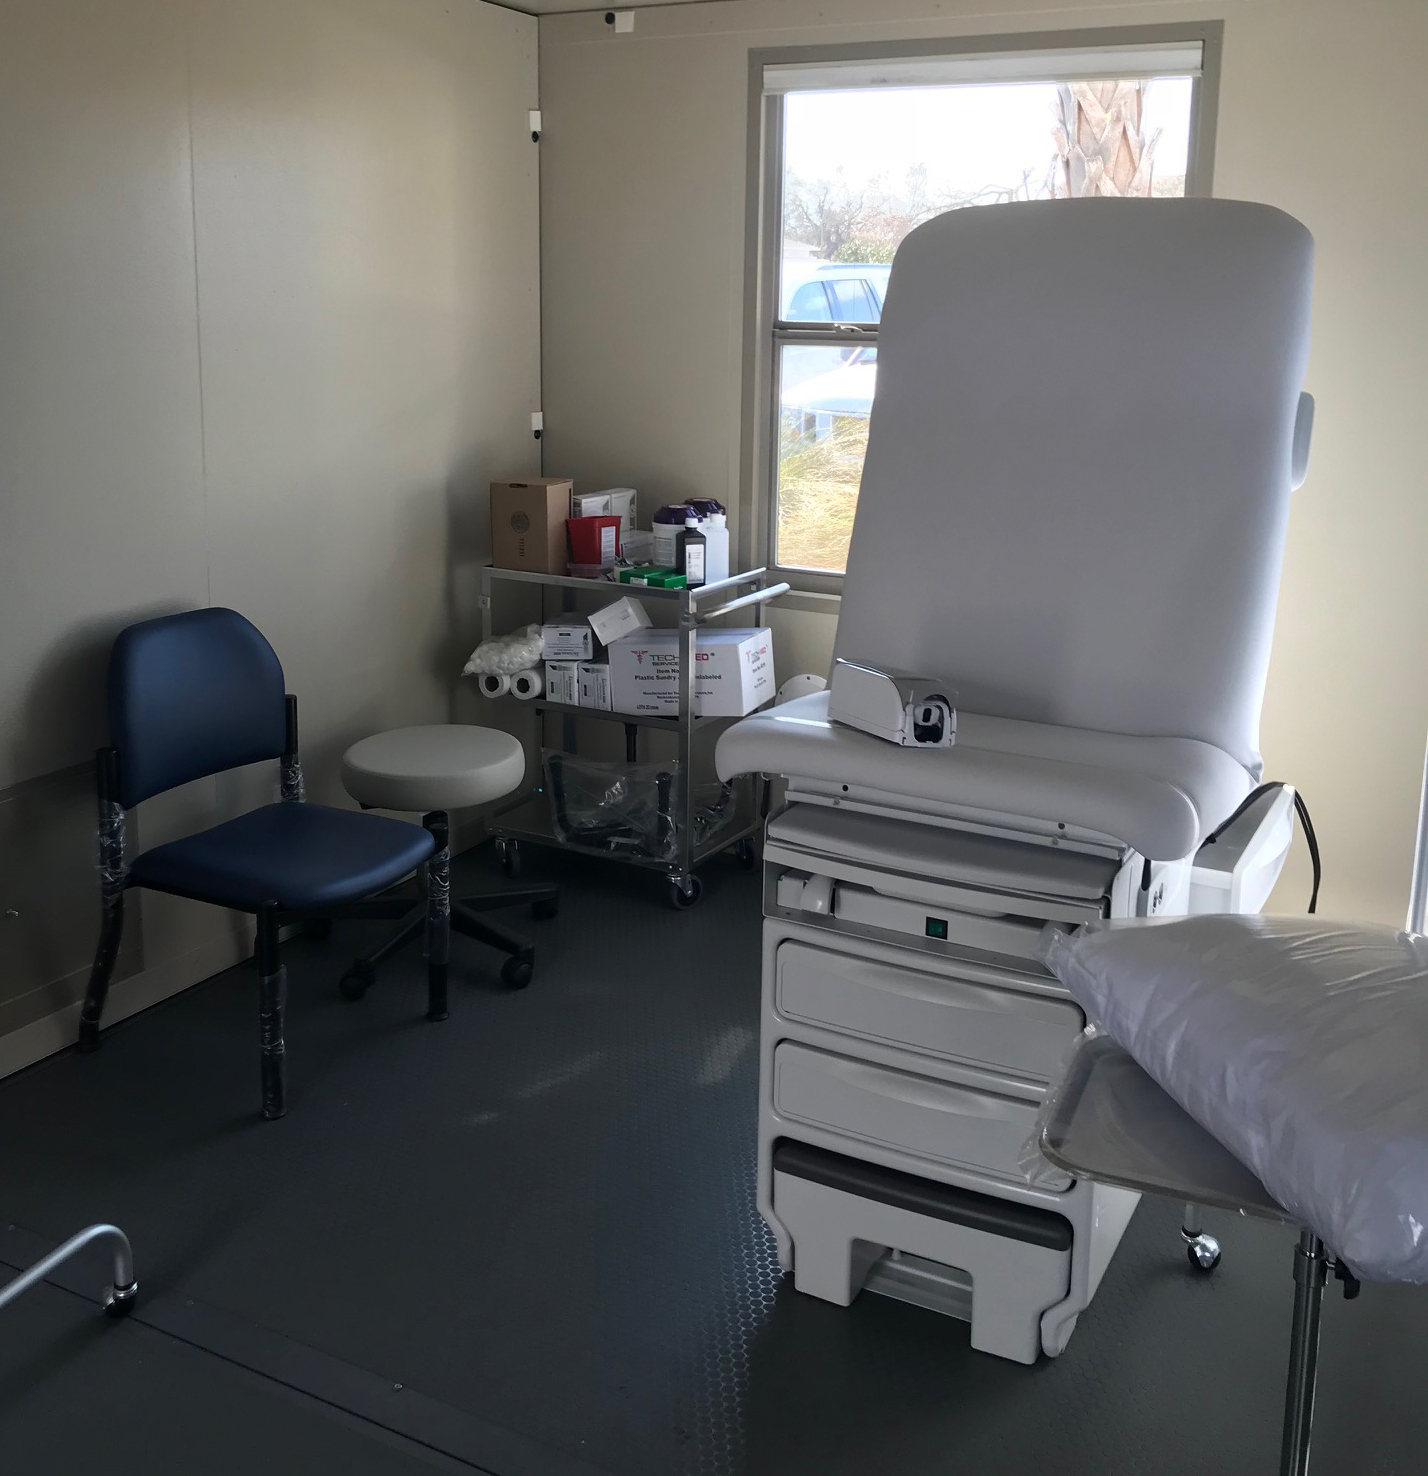 Room with small hospital bed, chairs and medical supplies